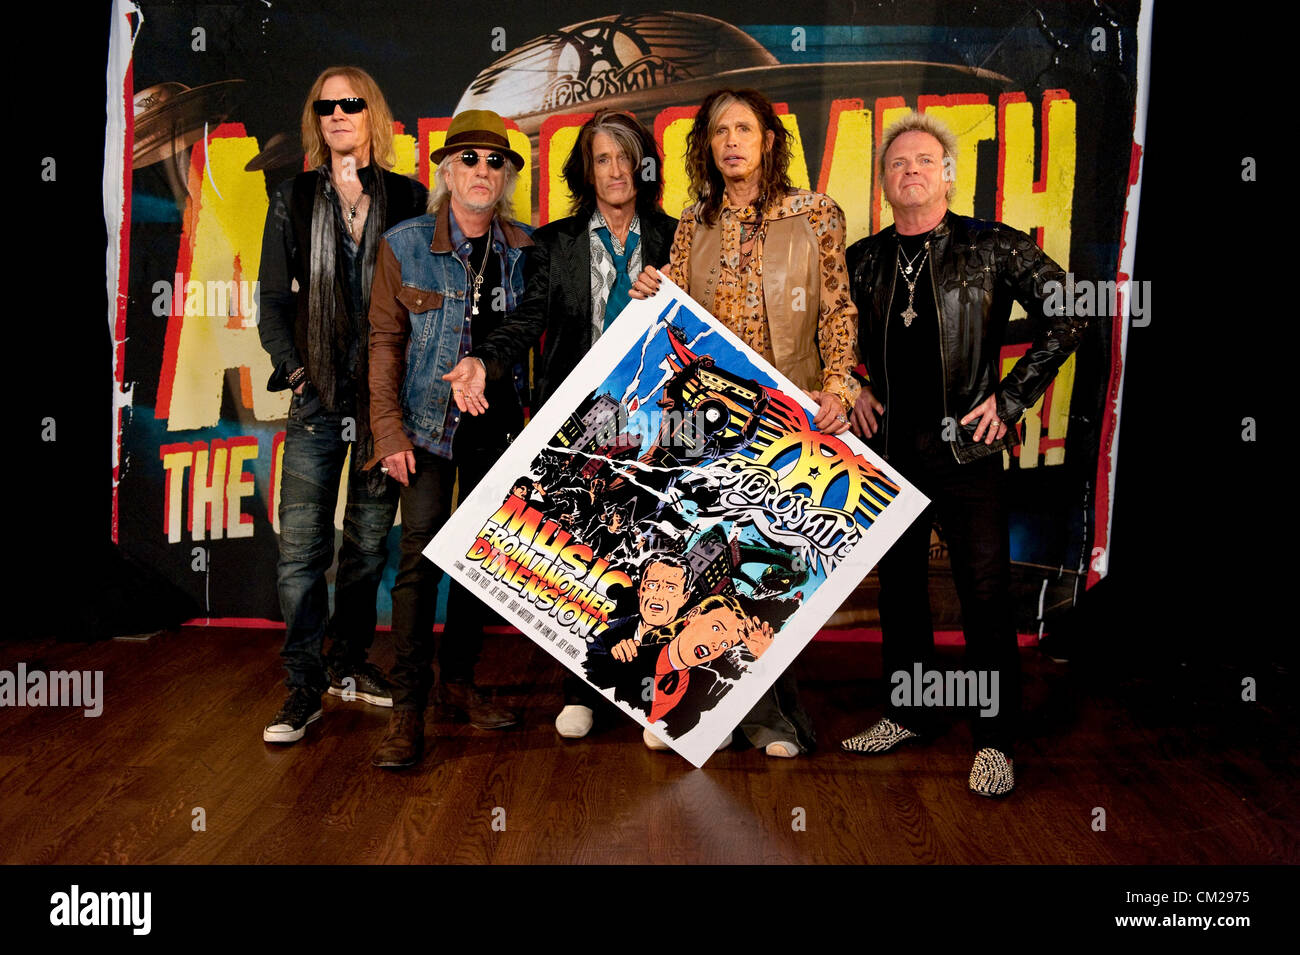 Sept. 18, 2012 - West Hollywood, California, U.S. - Members of AEROSMITH pose at the House of Blues Sunset Strip during a press junket regarding their Fall 2012 plans, which include new North American 'Global Warming' tour dates and their Music From Another Dimension album.(Credit Image: © Brian Cahn/ZUMAPRESS.com) Stock Photo